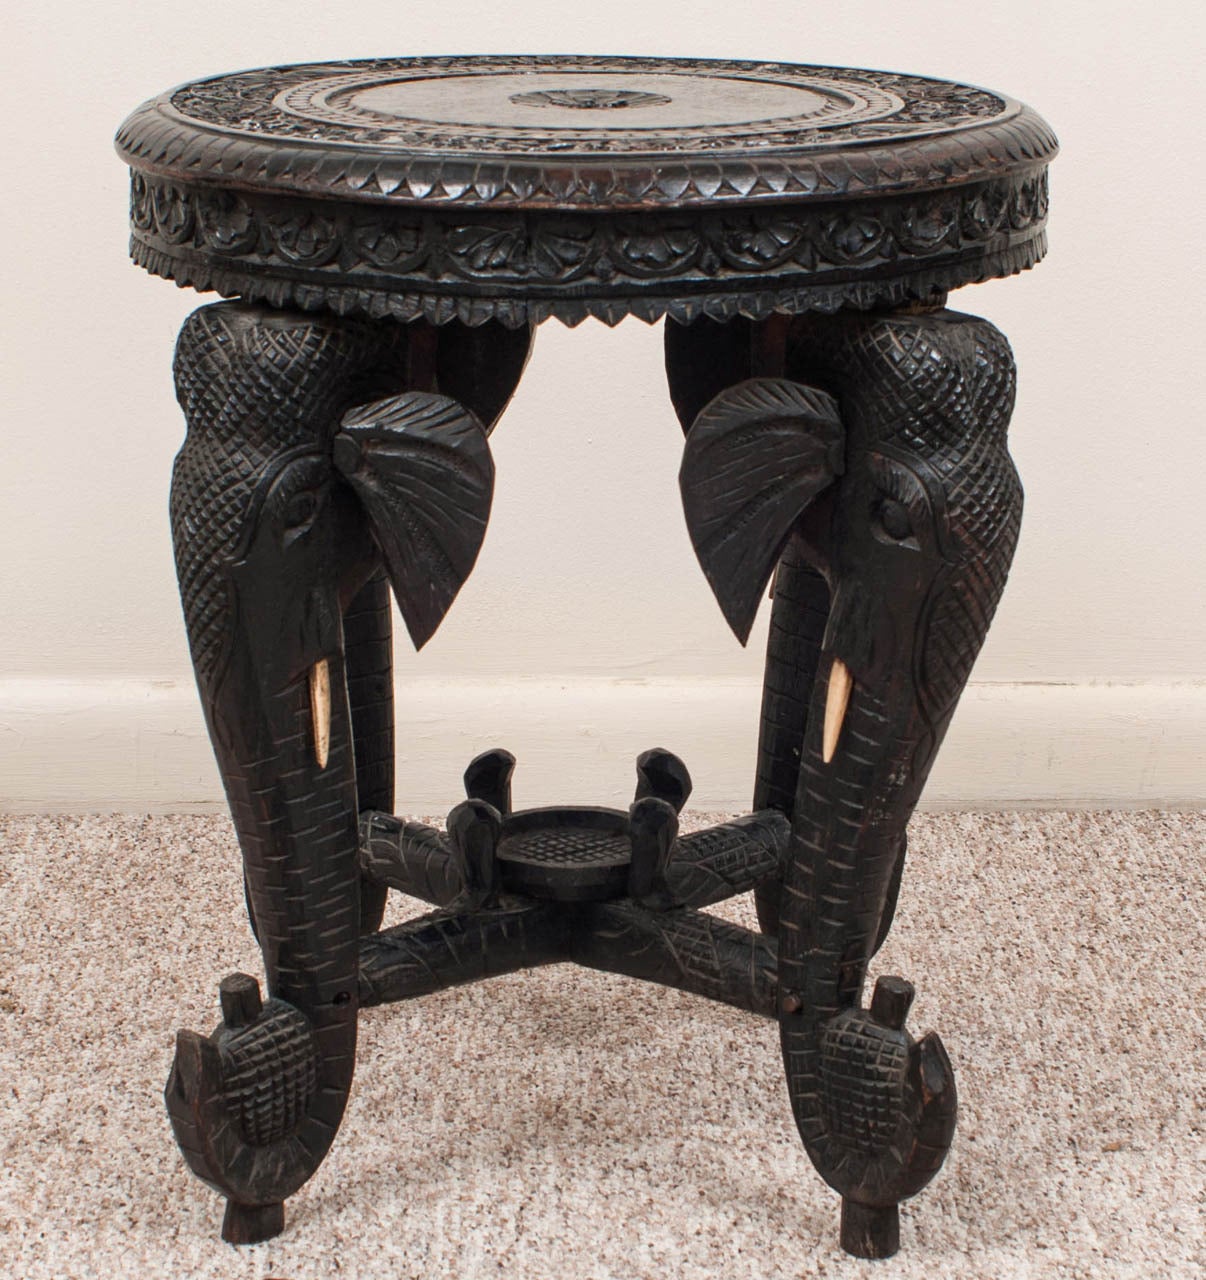 The round top supported by elephant form legs joined by a stretcher centered by a small platform for a vase or urn.